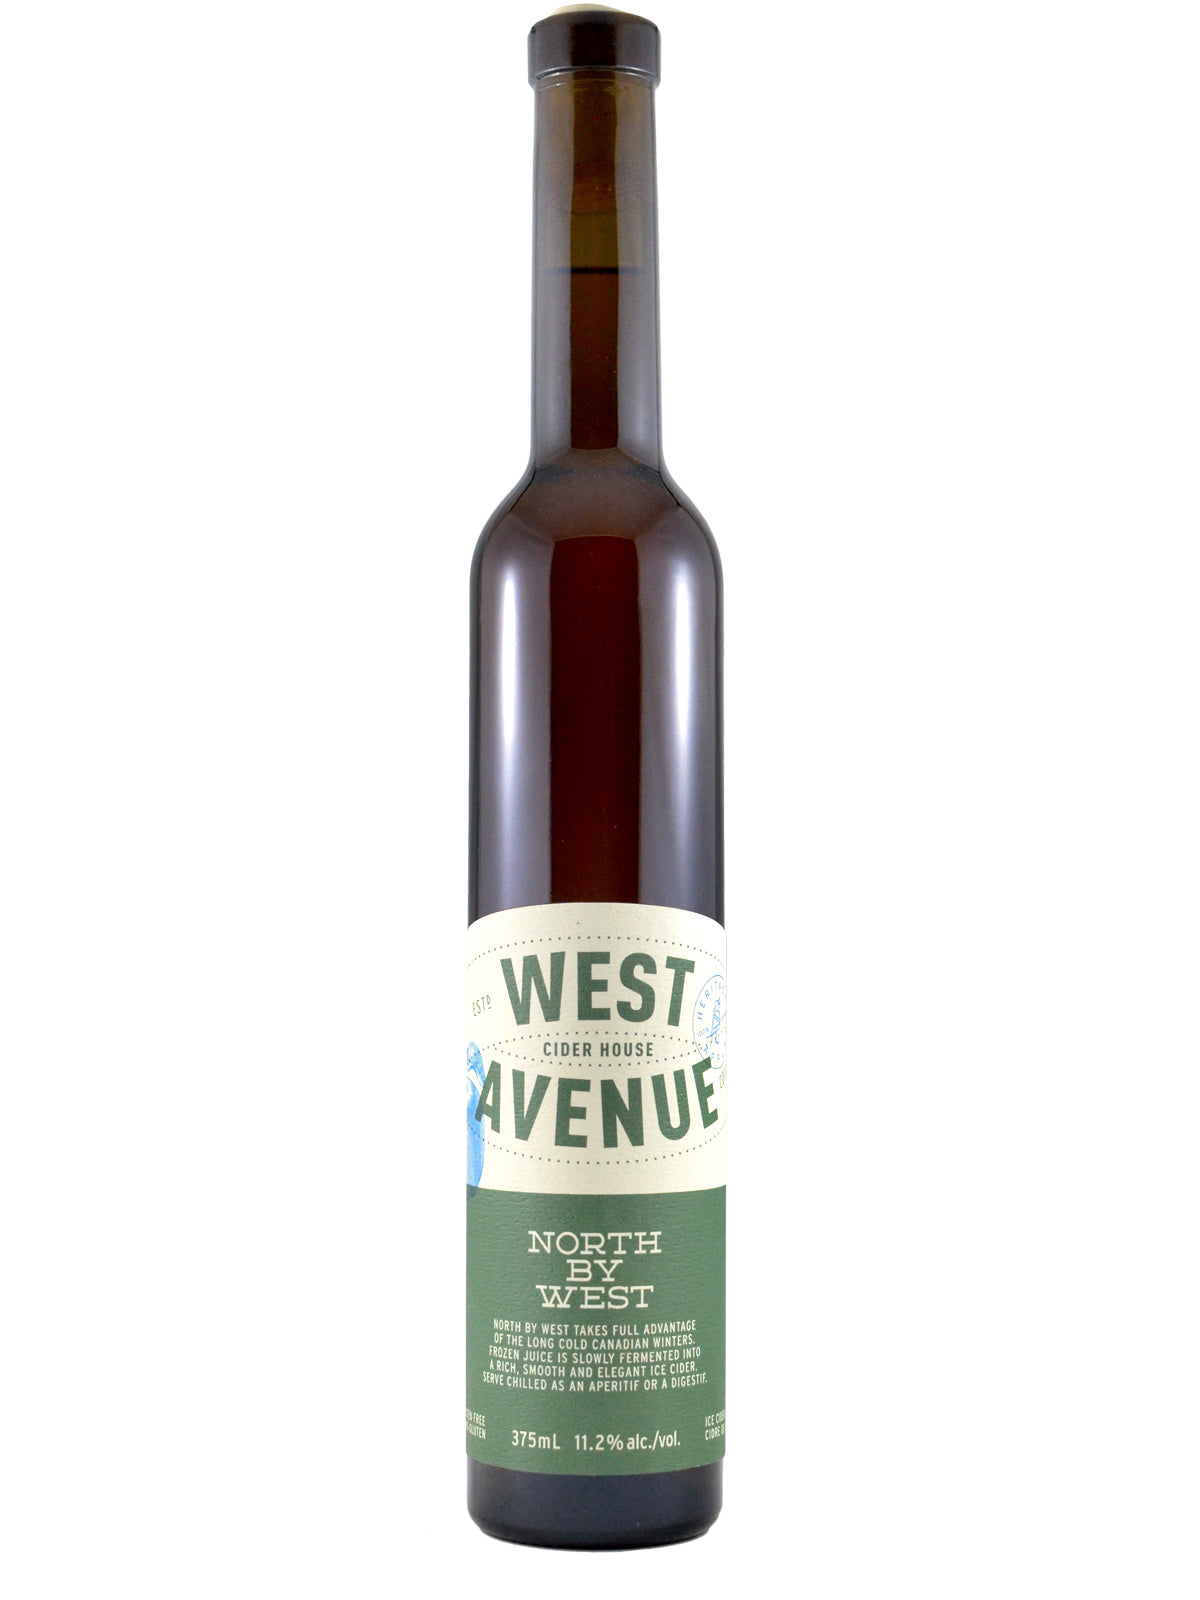 West Avenue, North By West Iced Cider